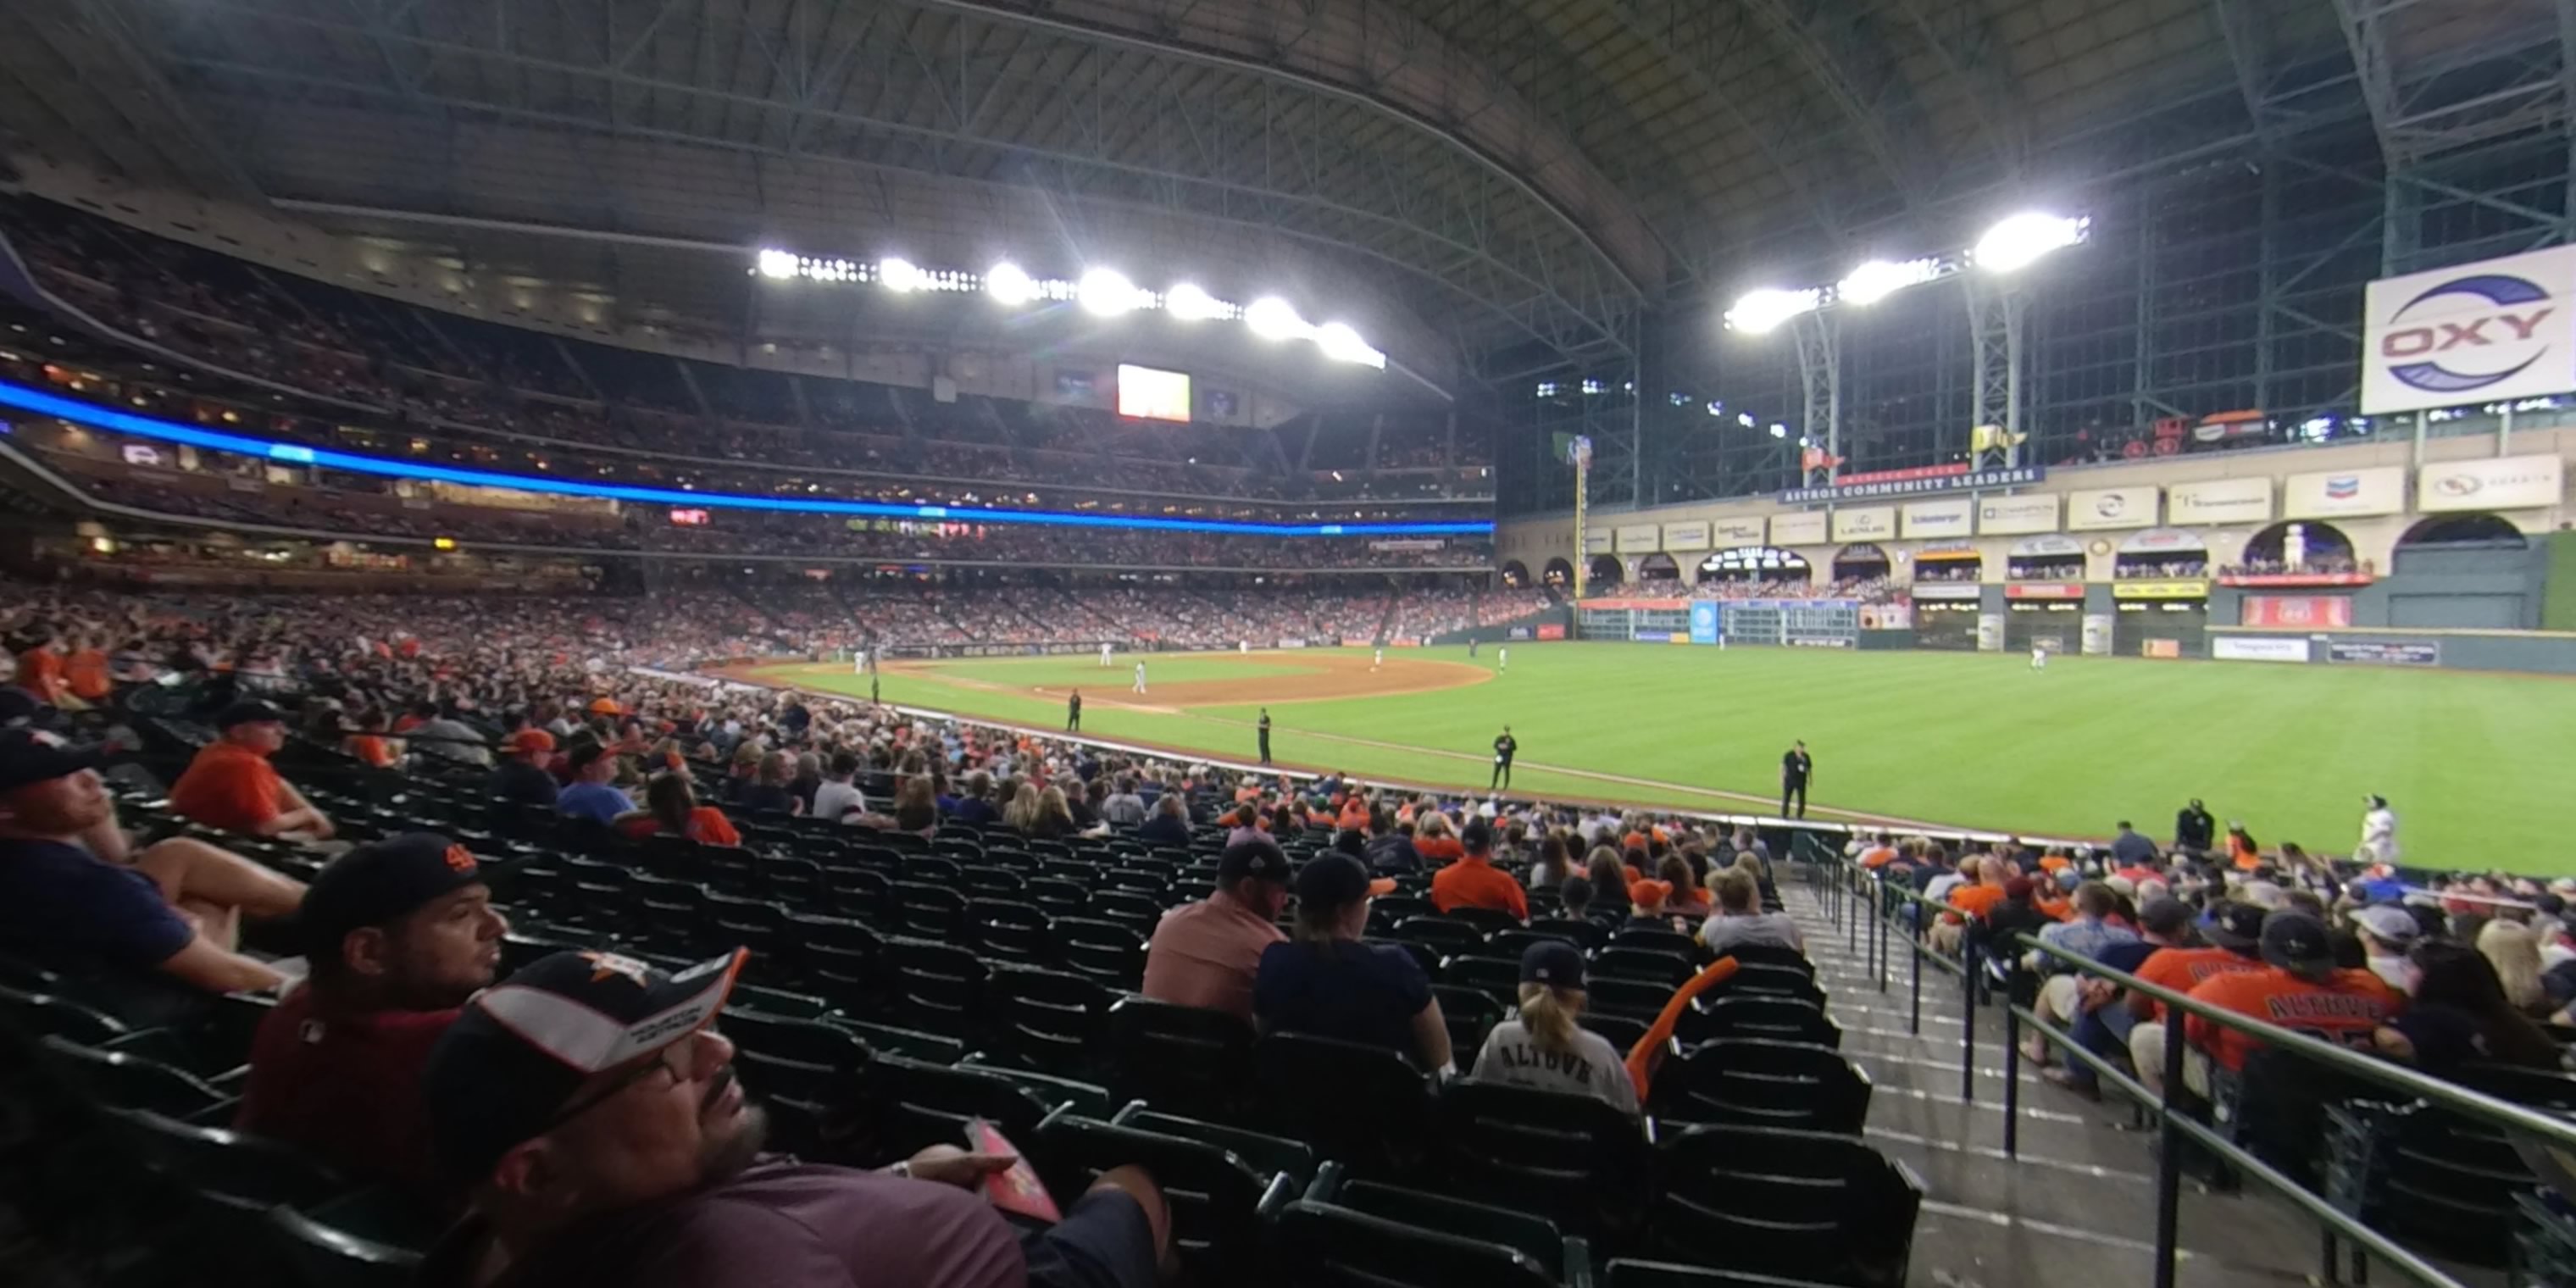 section 131 panoramic seat view  for baseball - minute maid park